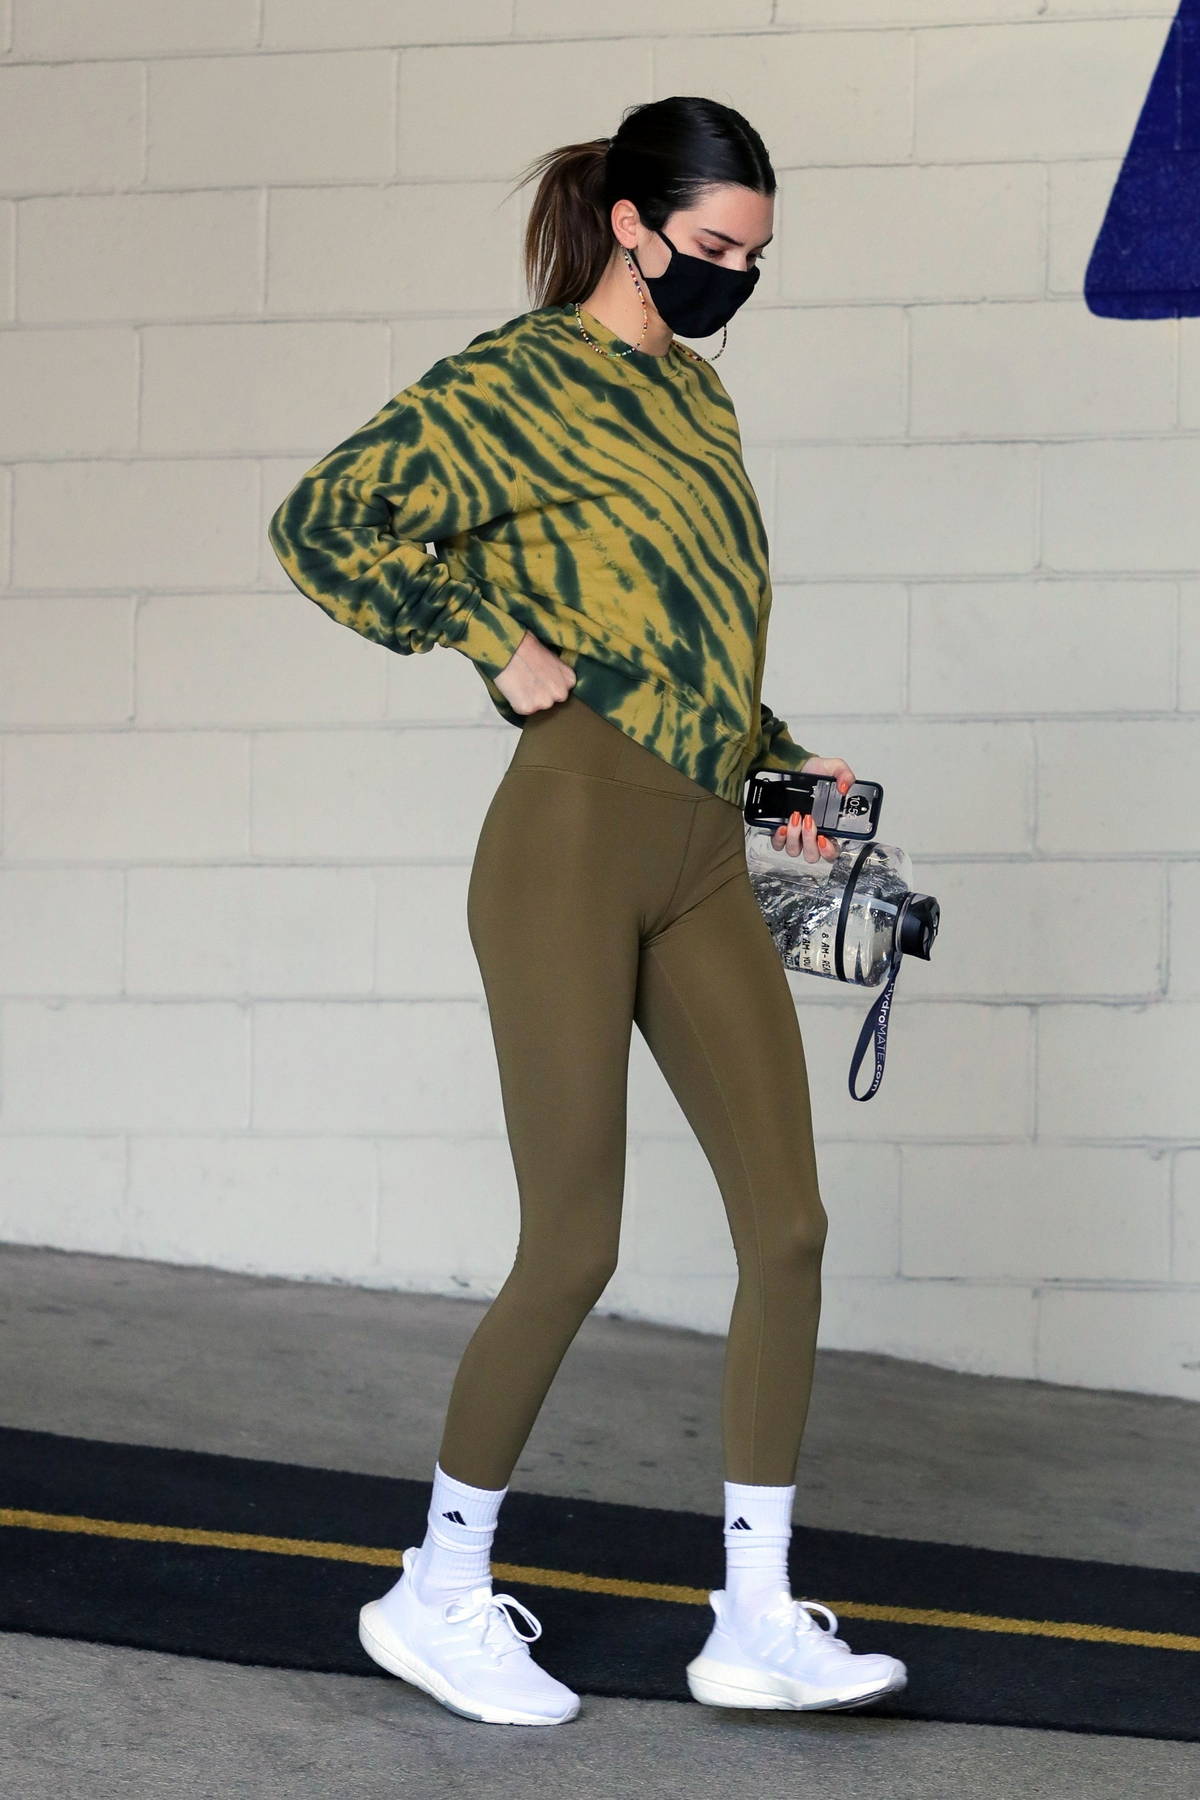 Kendall Jenner shows off her slender figure in grey leggings while grabbing  juice with a friend